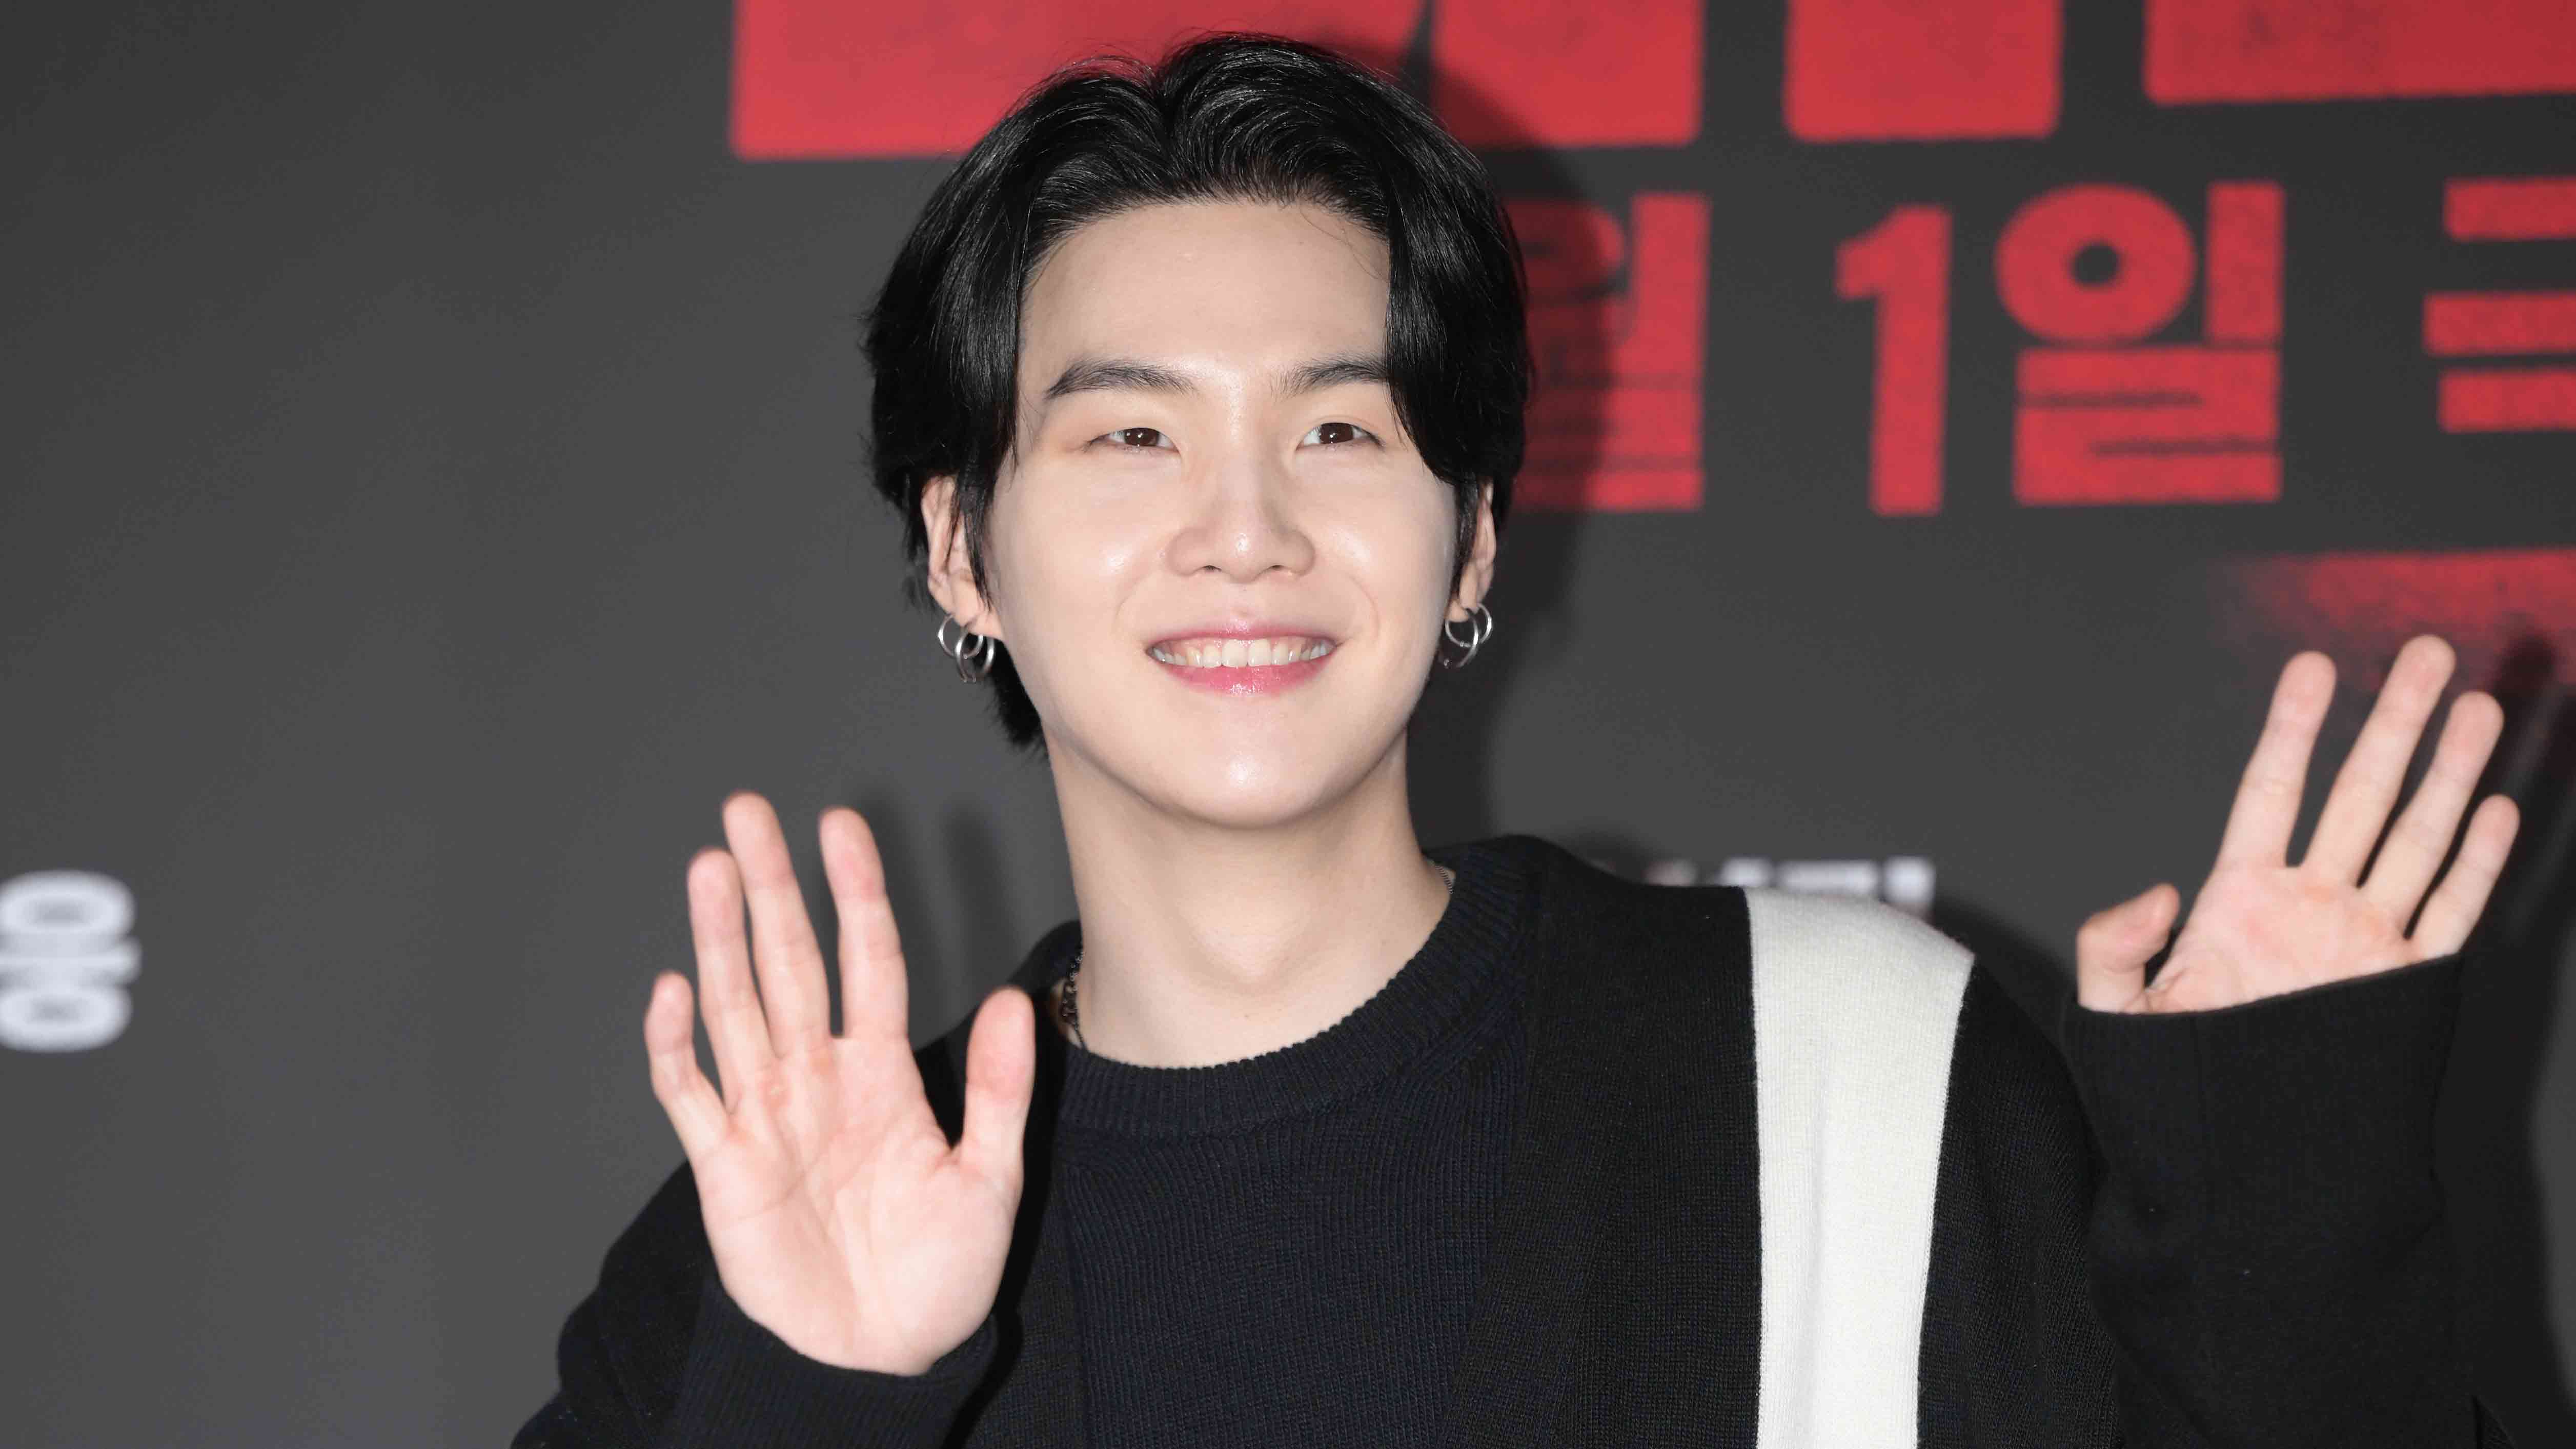 BTS' Suga to fulfill military service as social service agent